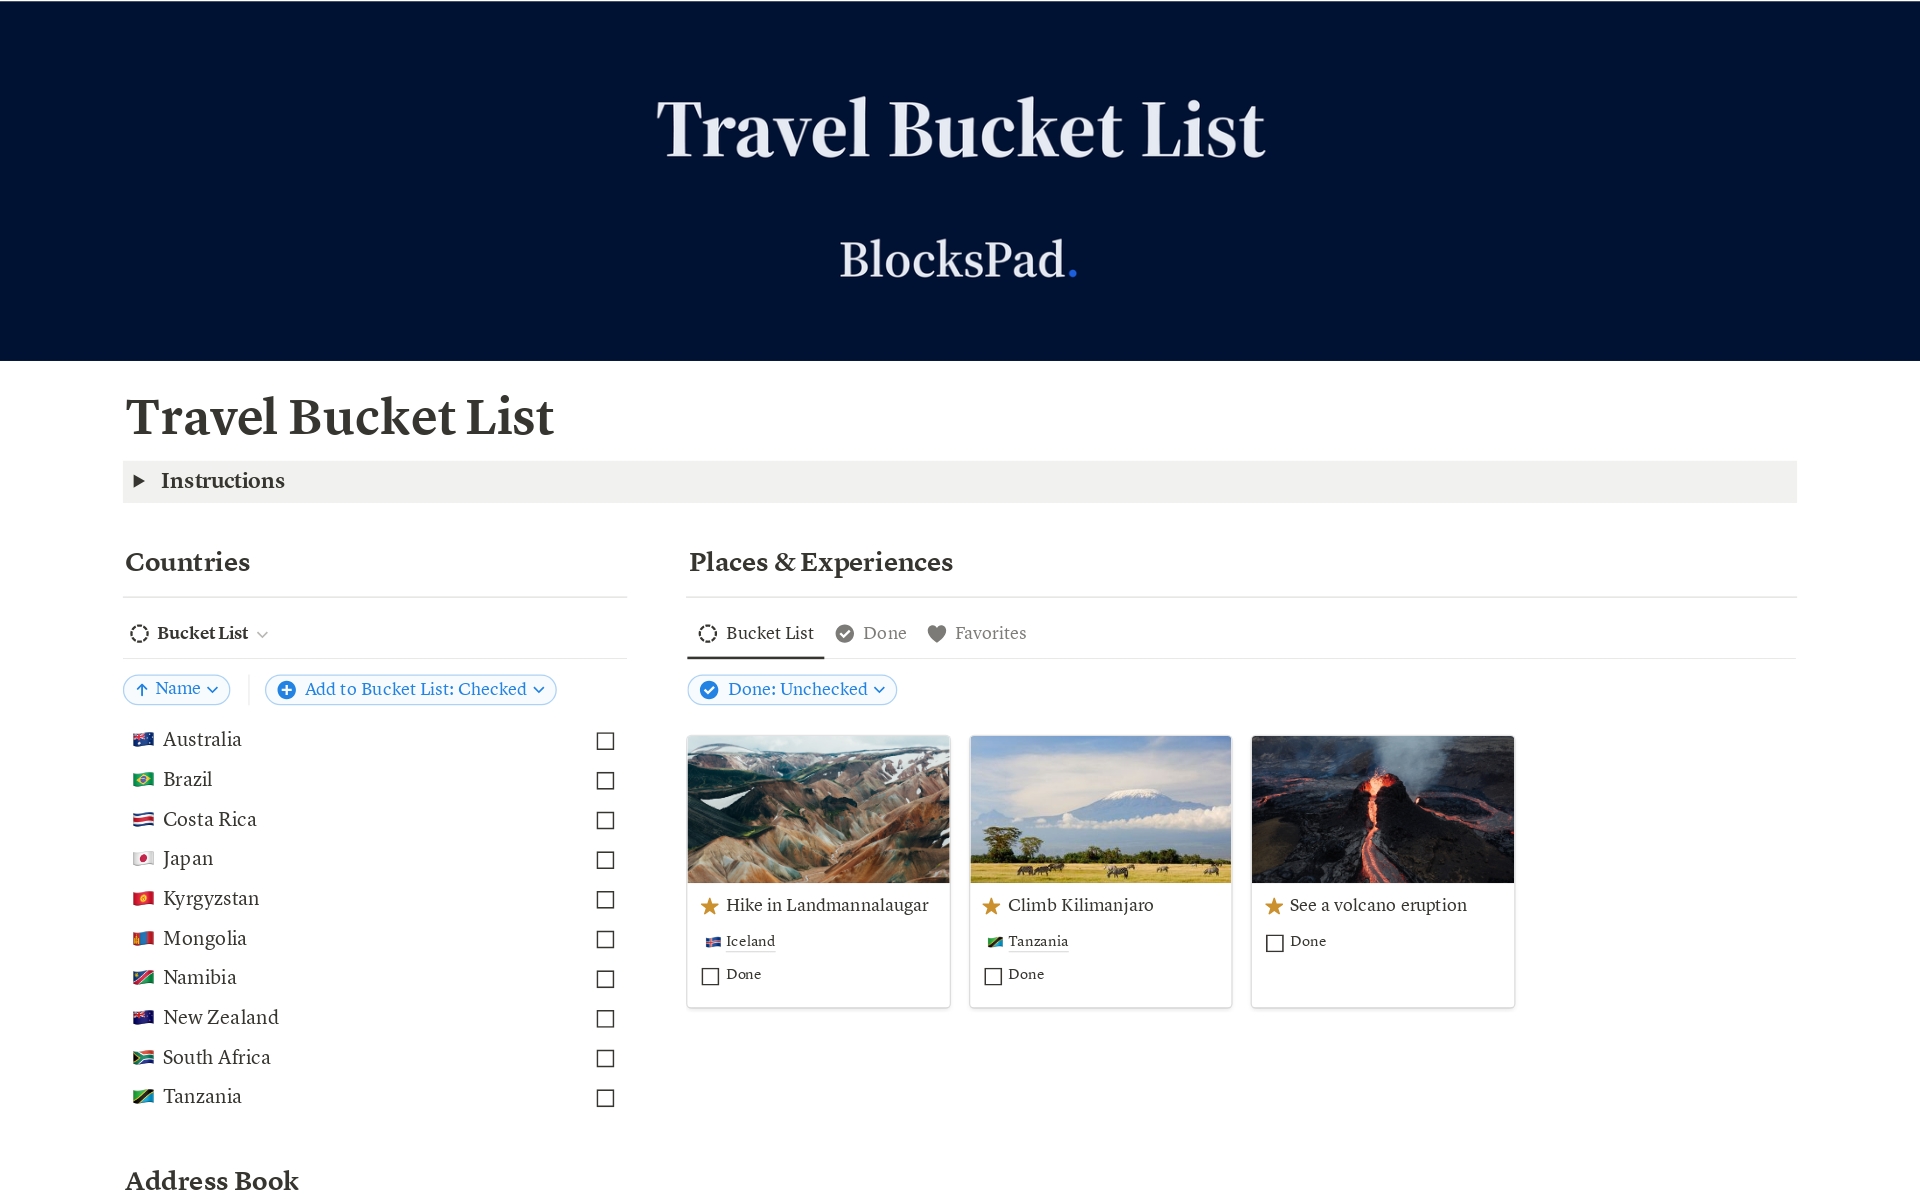 Create your travel bucket list in the snap of a finger and set off to conquer your dreams.